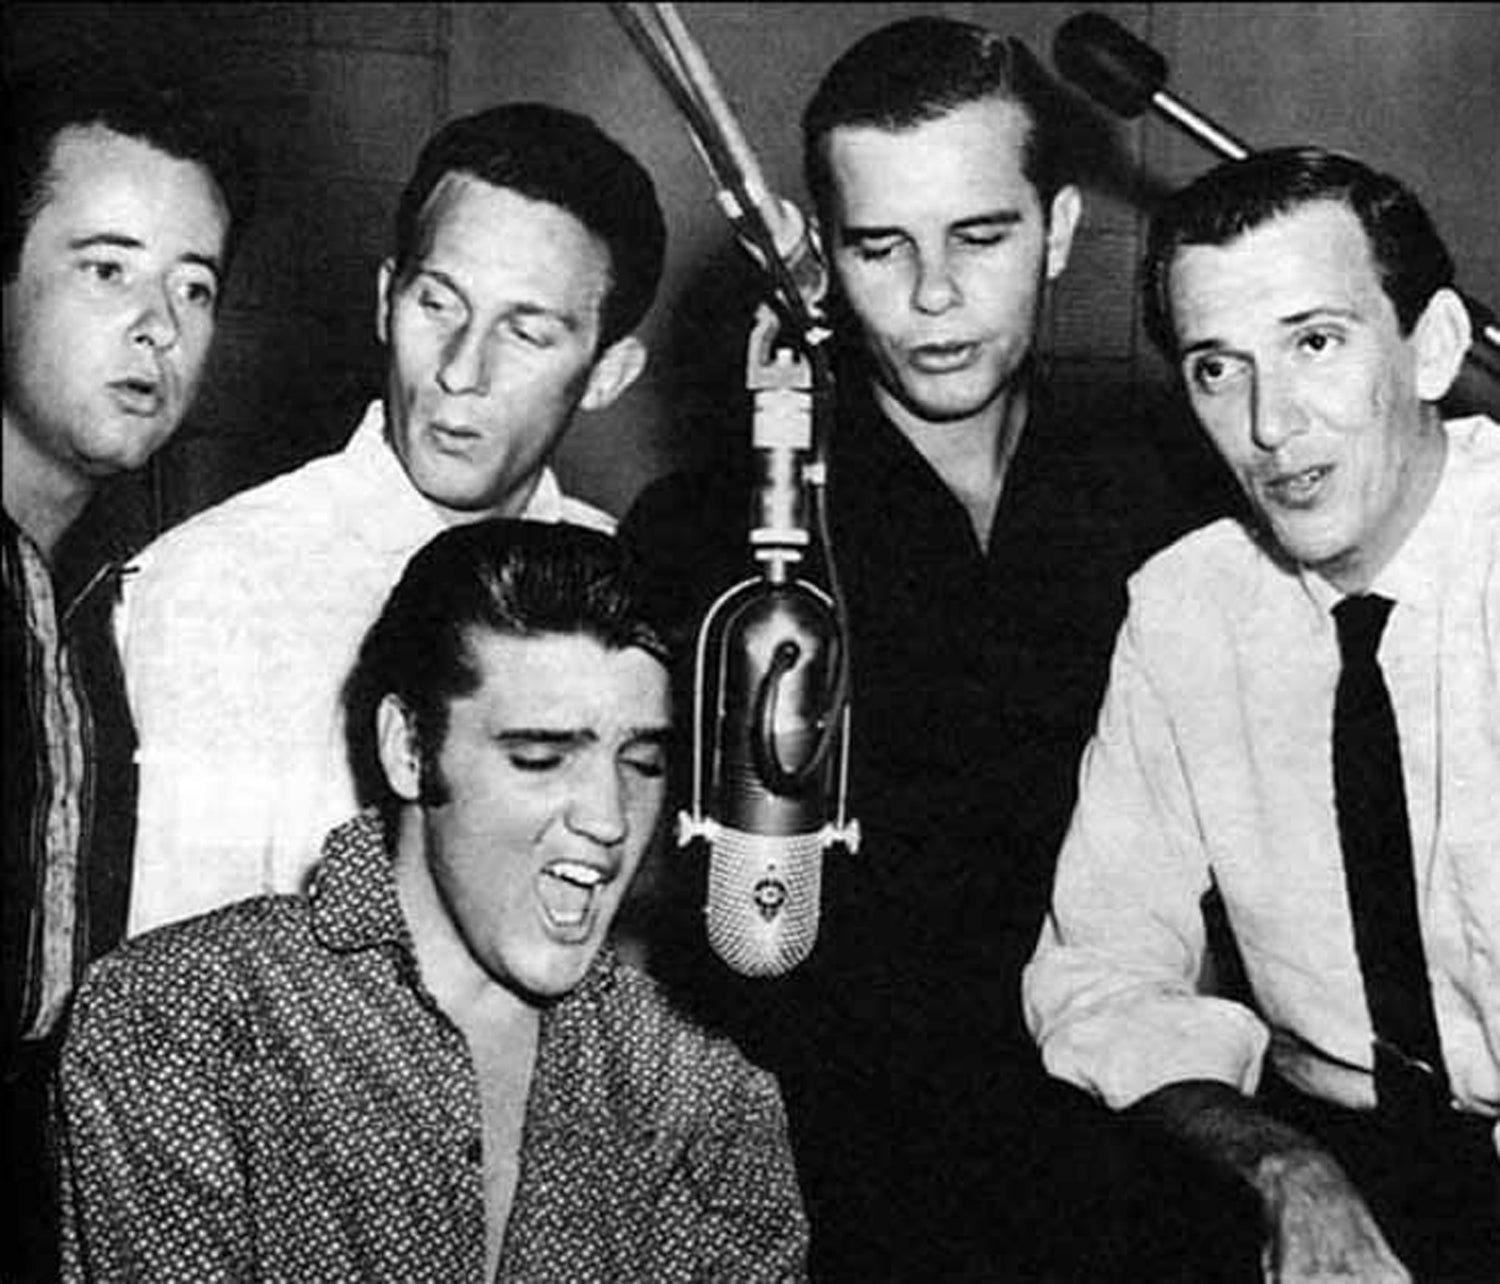 The Jordanaires: The Story of the World's Greatest Backup Vocal Group (Paperback)